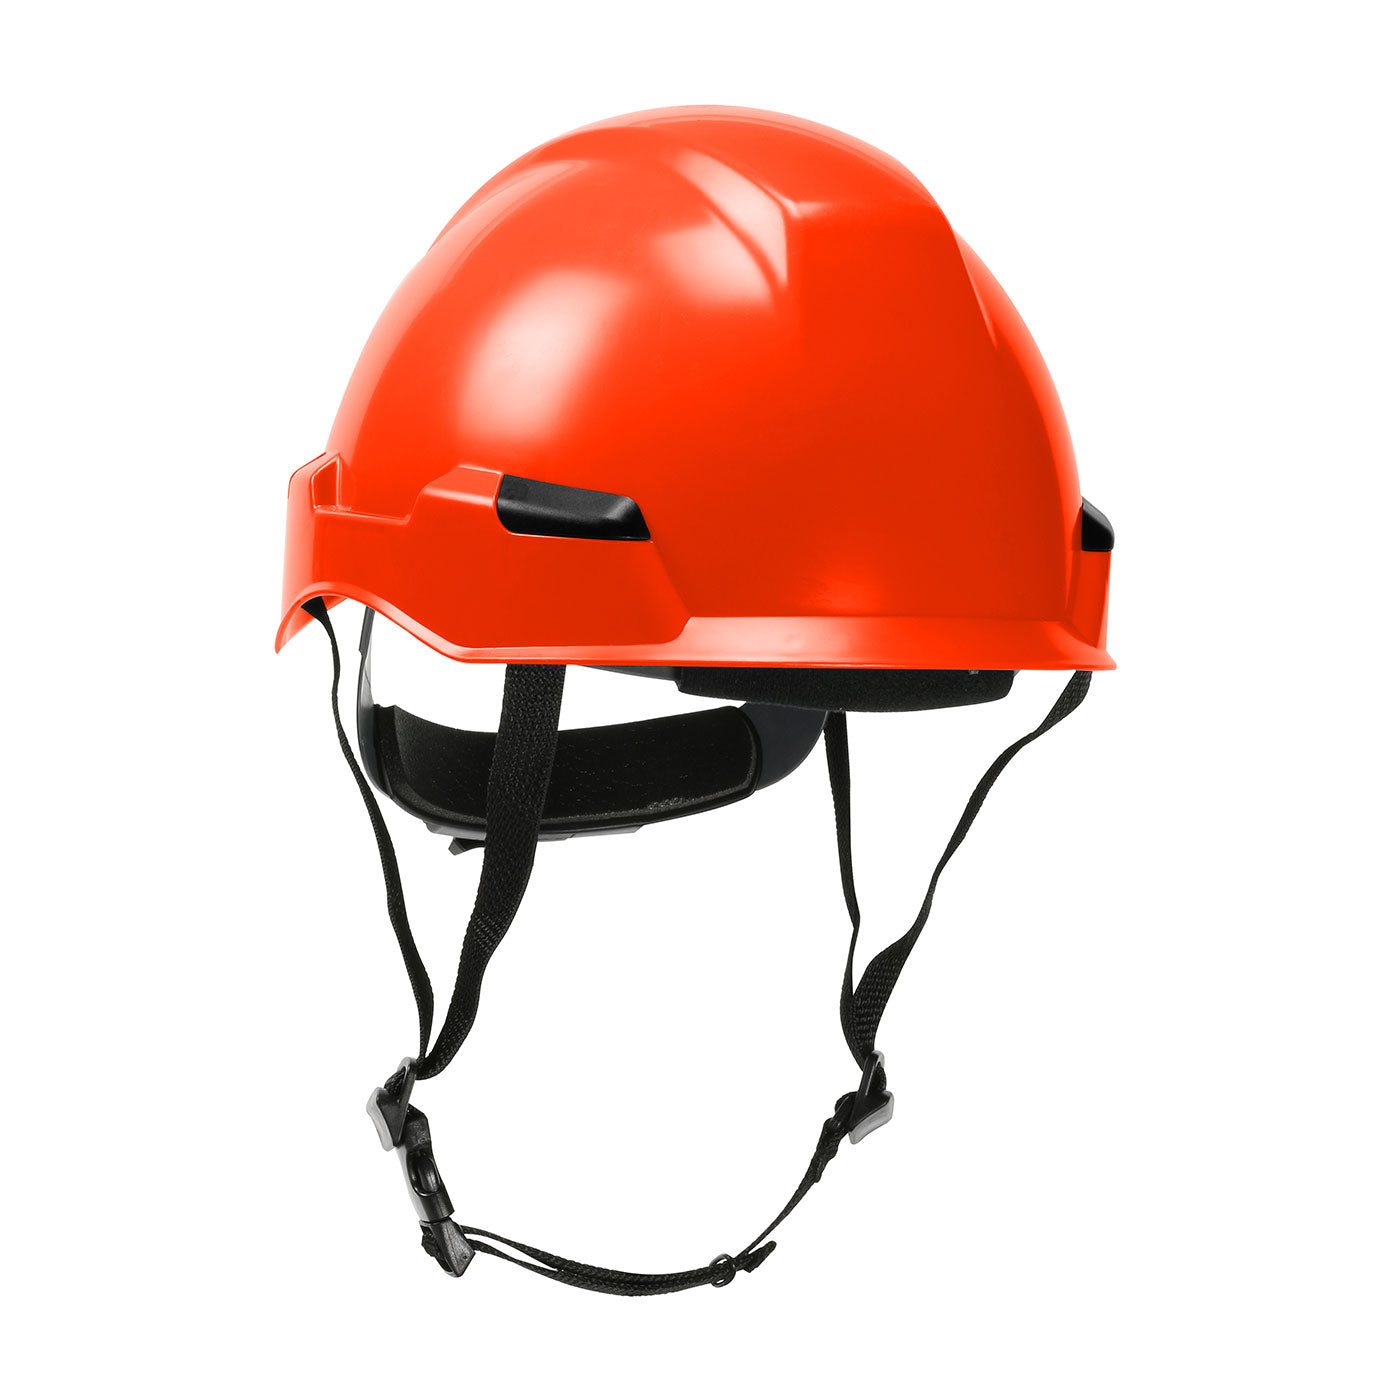 Rocky™ Industrial Climbing Helmet with Polycarbonate / ABS Shell, Hi-Density Foam Impact Liner, Nylon Suspension, Wheel Ratchet Adjustment and 4-Point Chin Strap